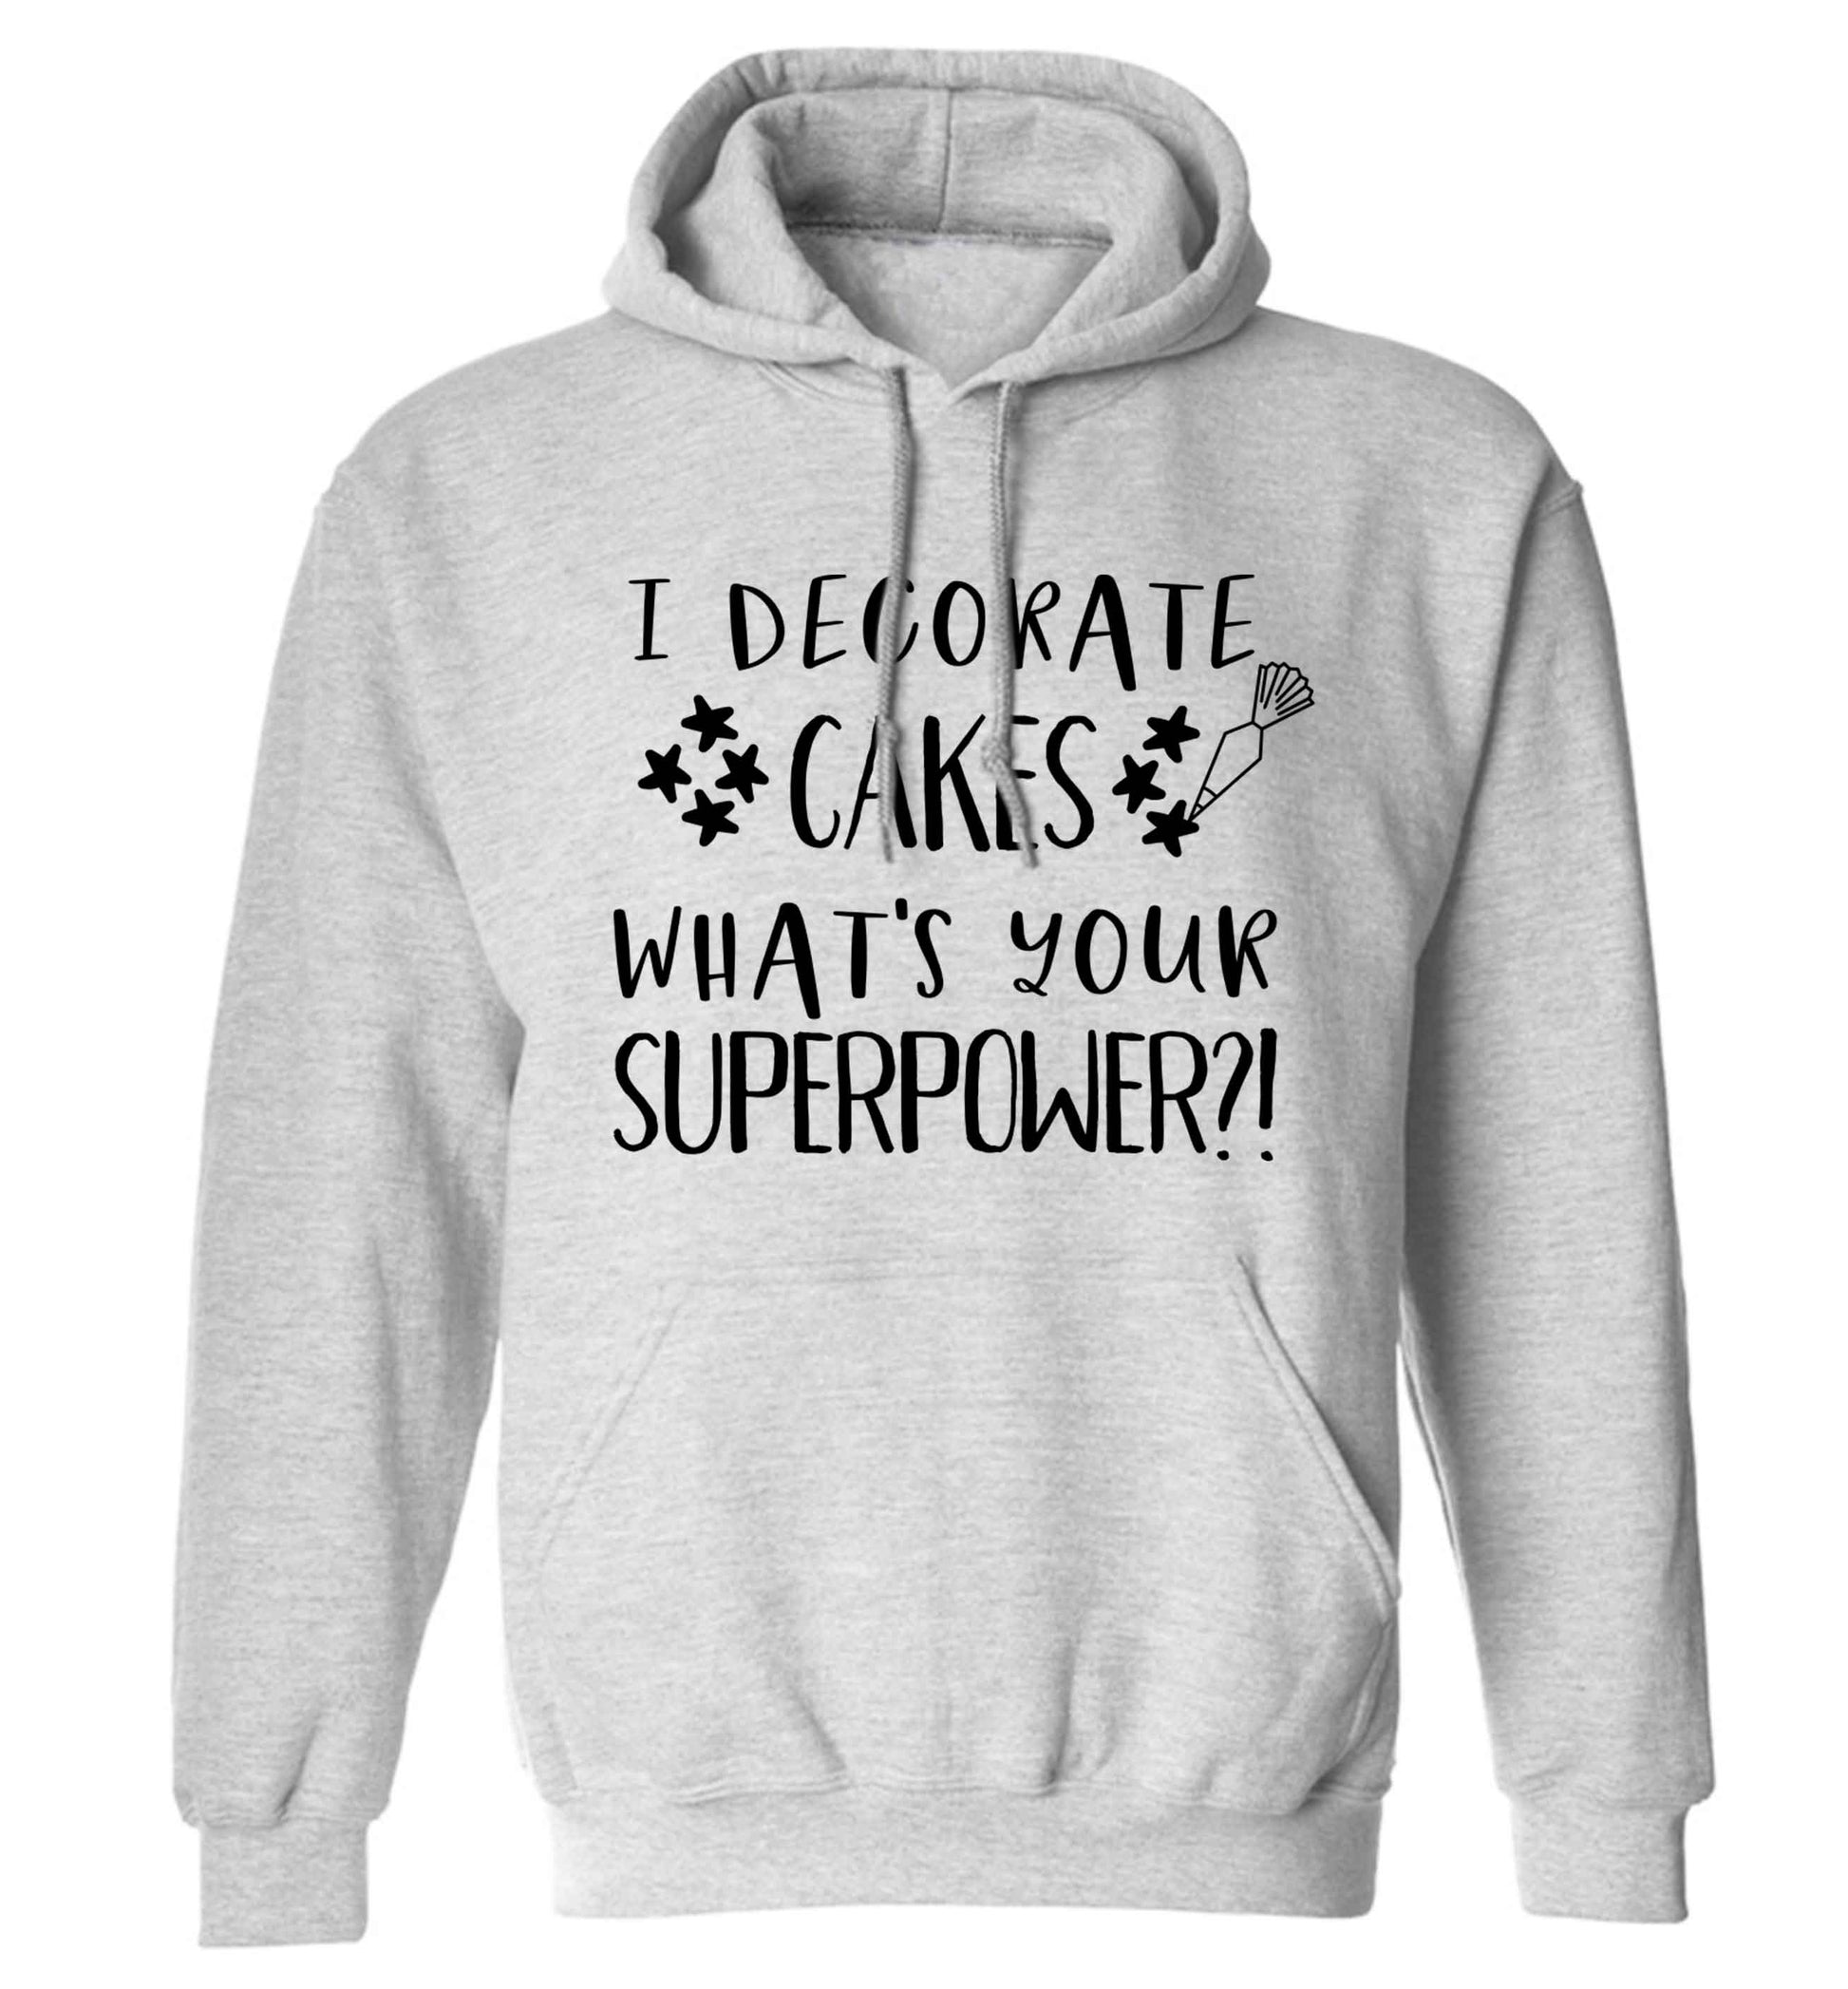 I decorate cakes what's your superpower?! adults unisex grey hoodie 2XL